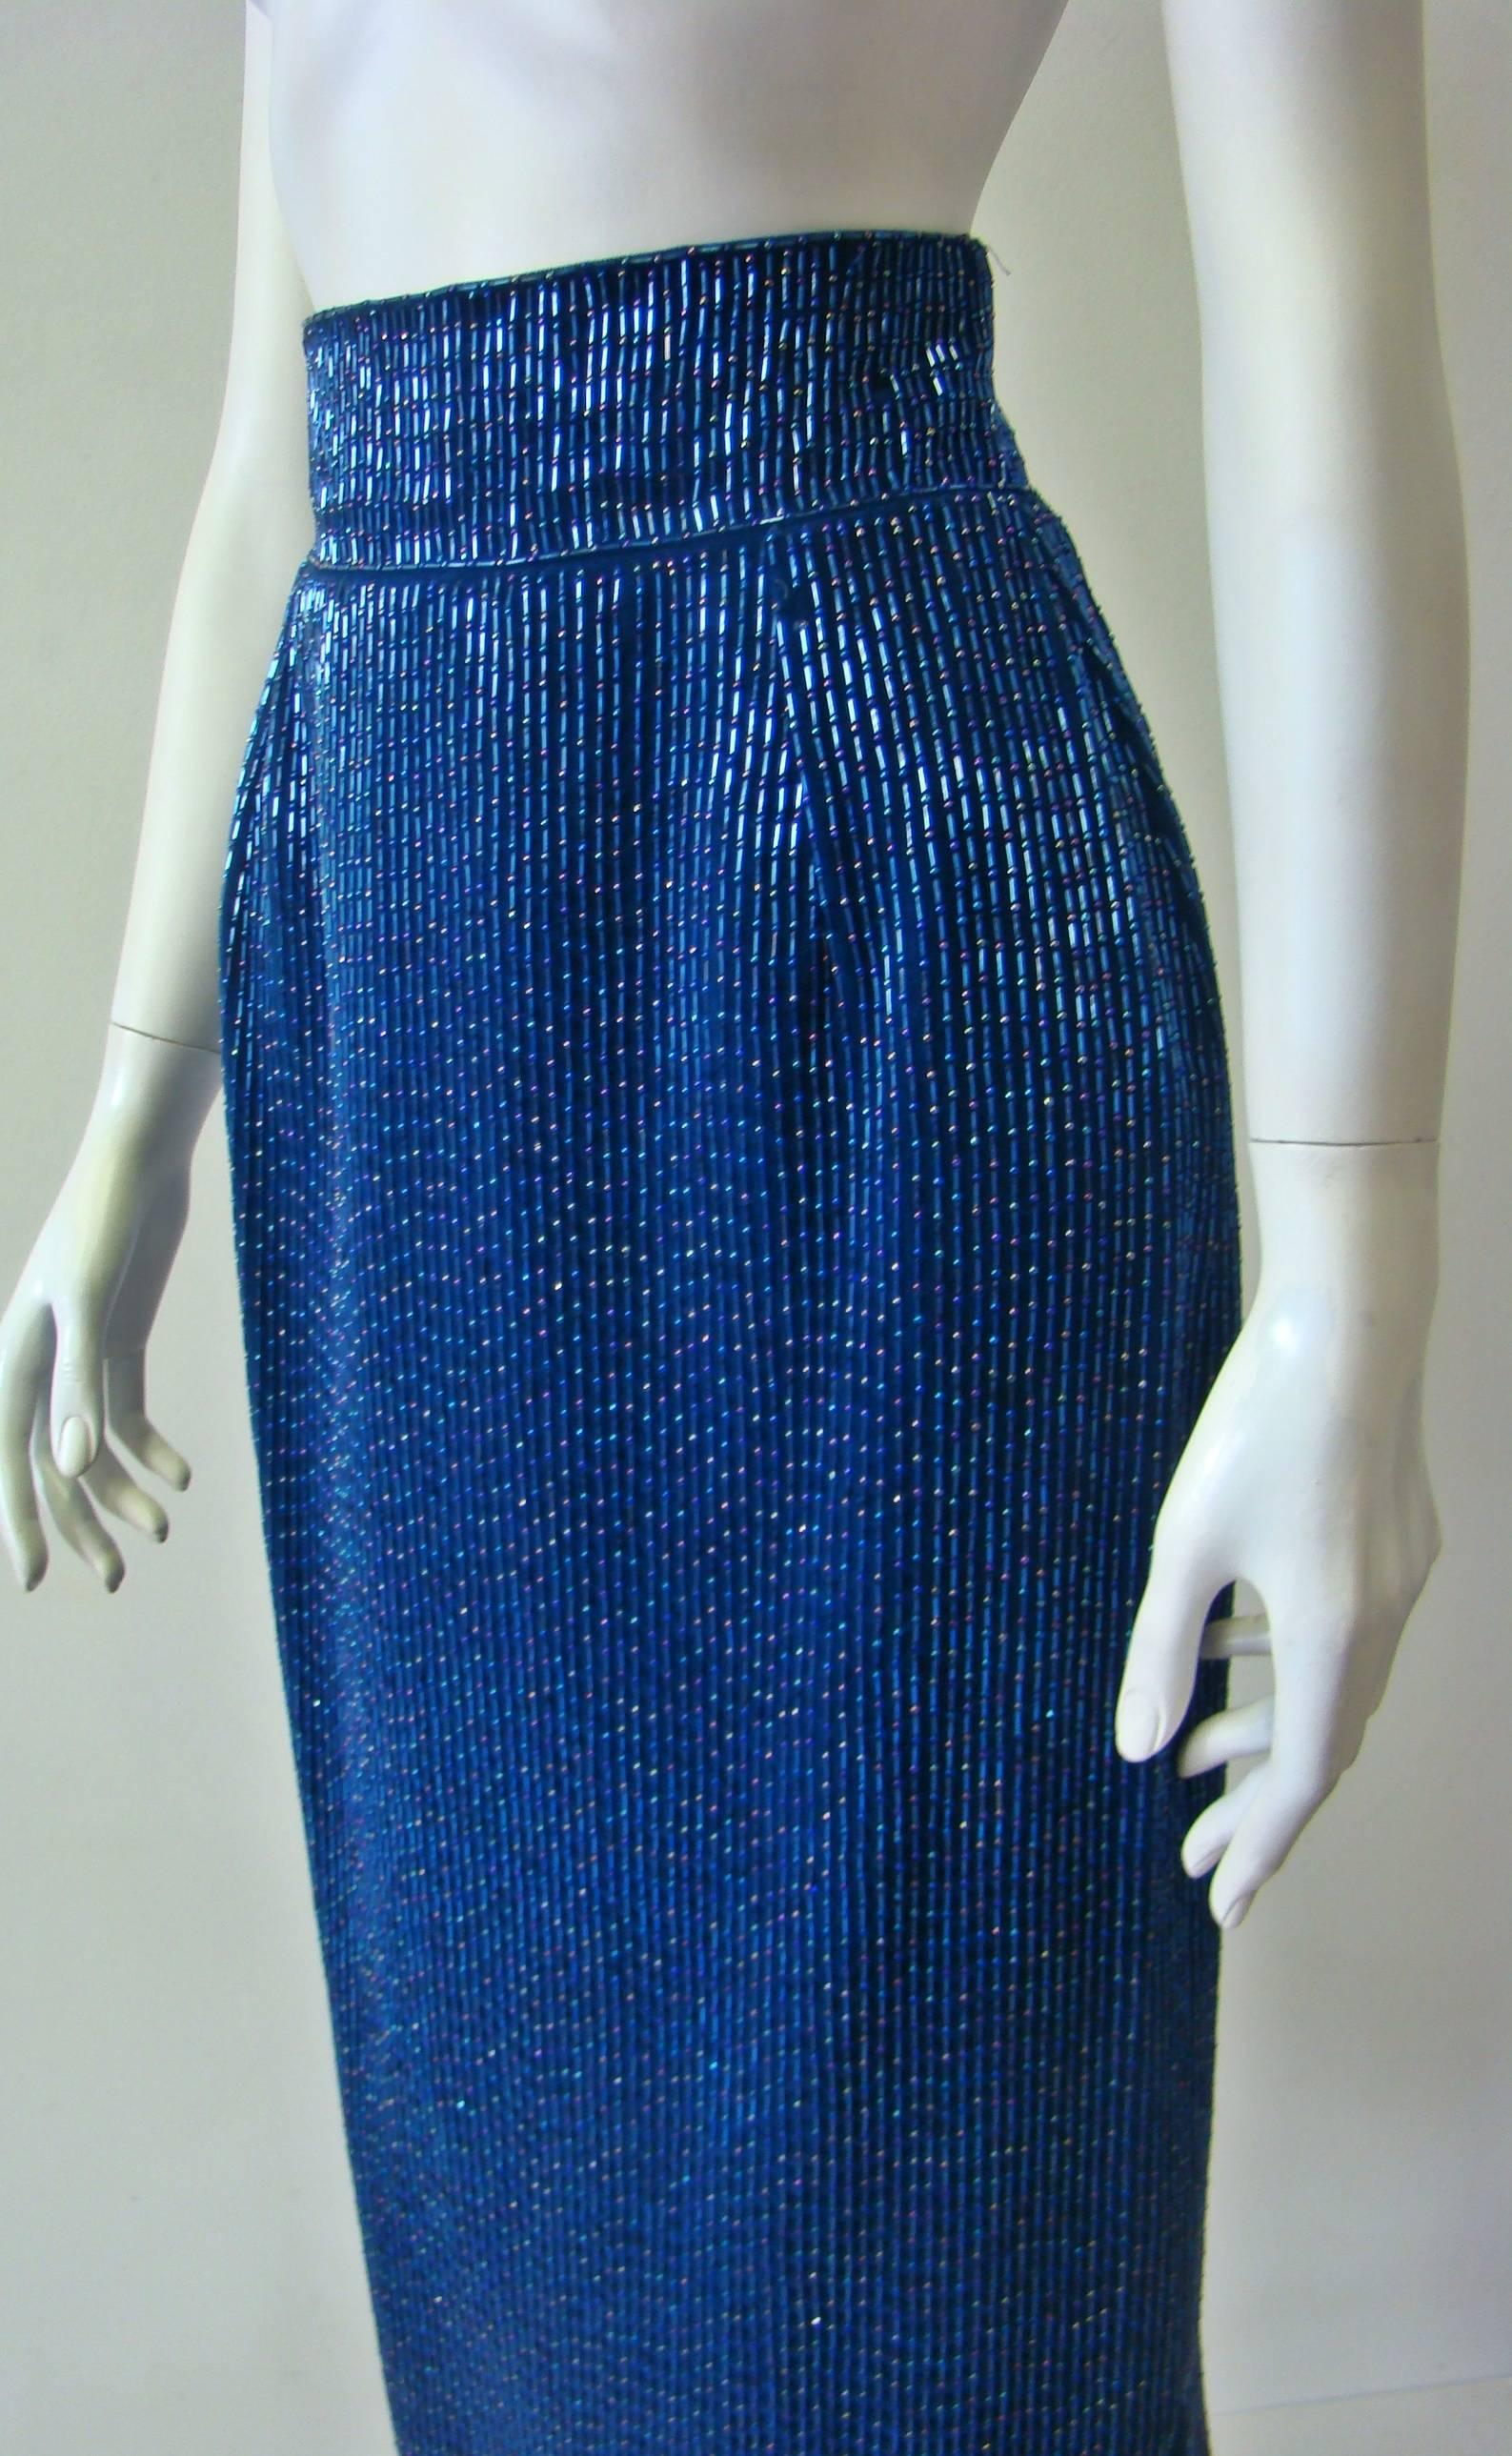 Early Gianni Versace Beaded Evening Skirt Fall 1983 In Excellent Condition For Sale In Athens, Agia Paraskevi